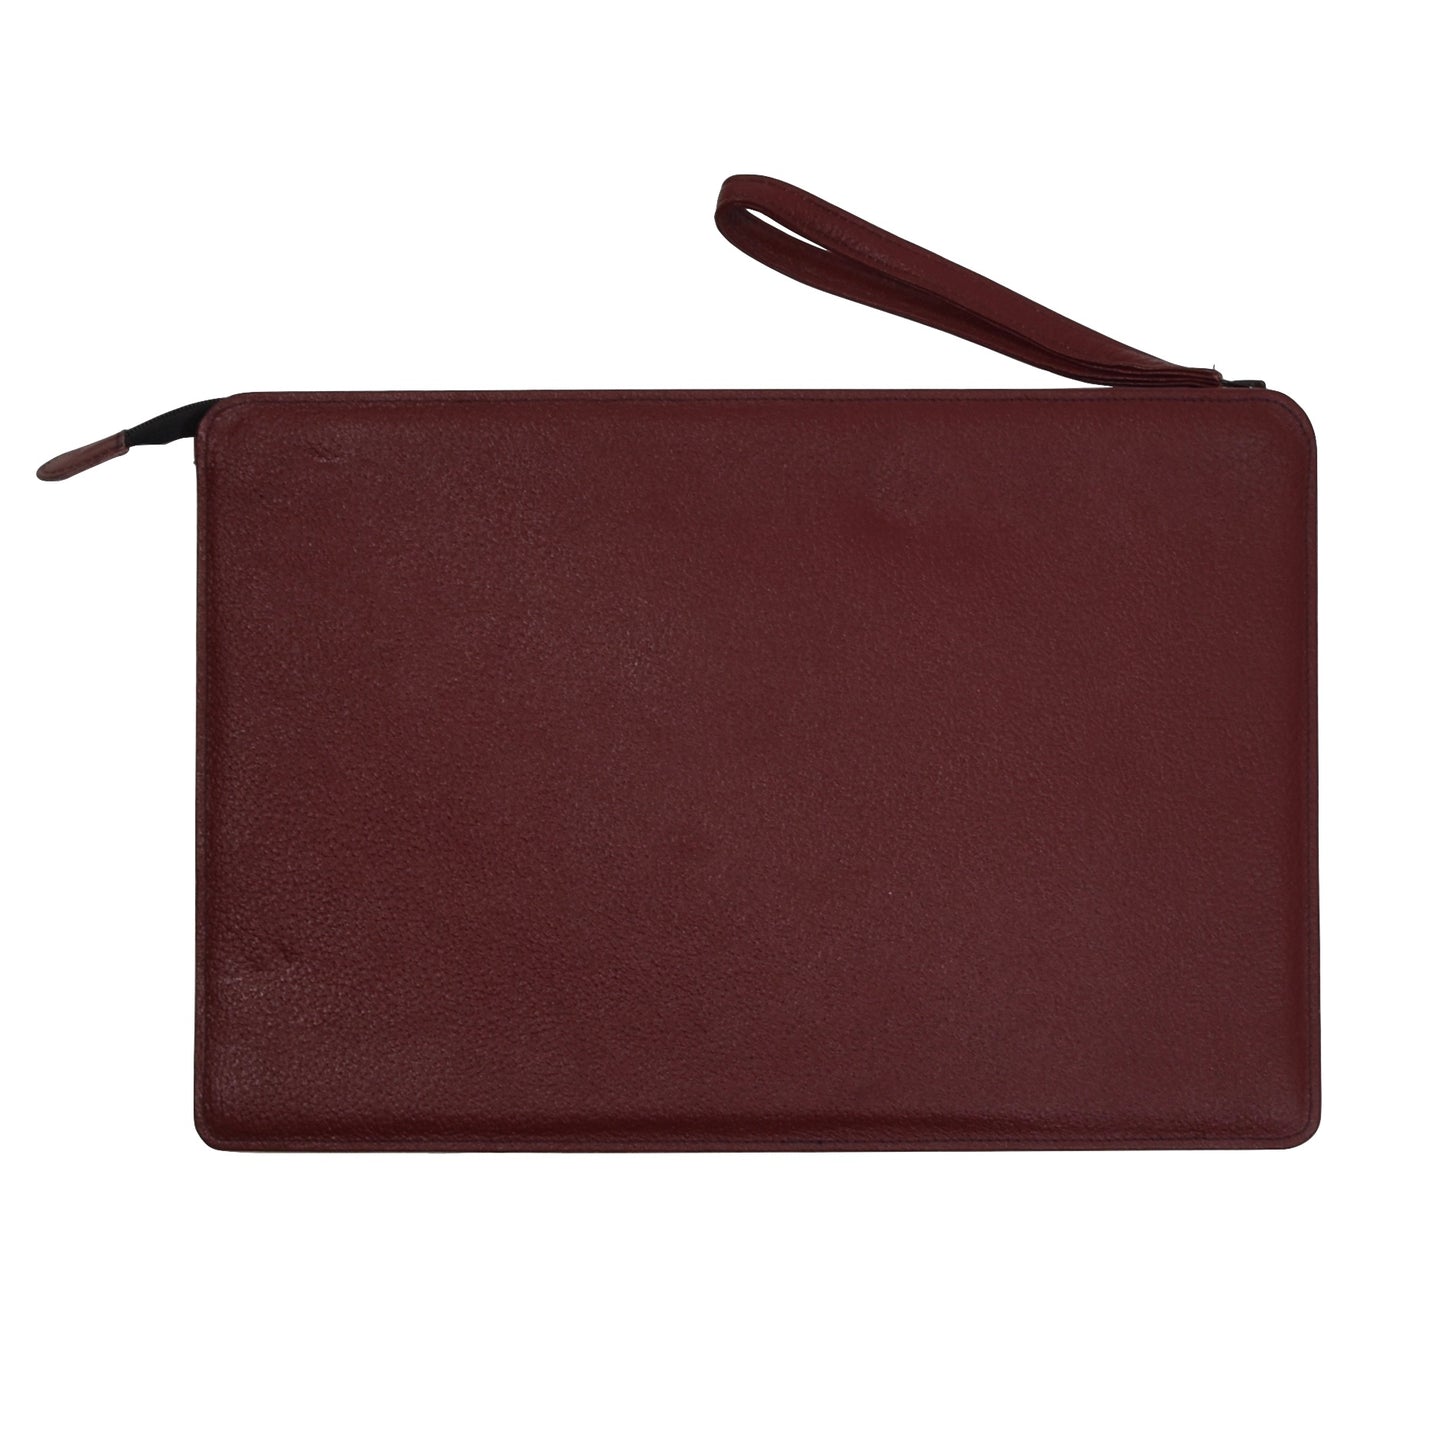 2x Leather Document Holders - Red